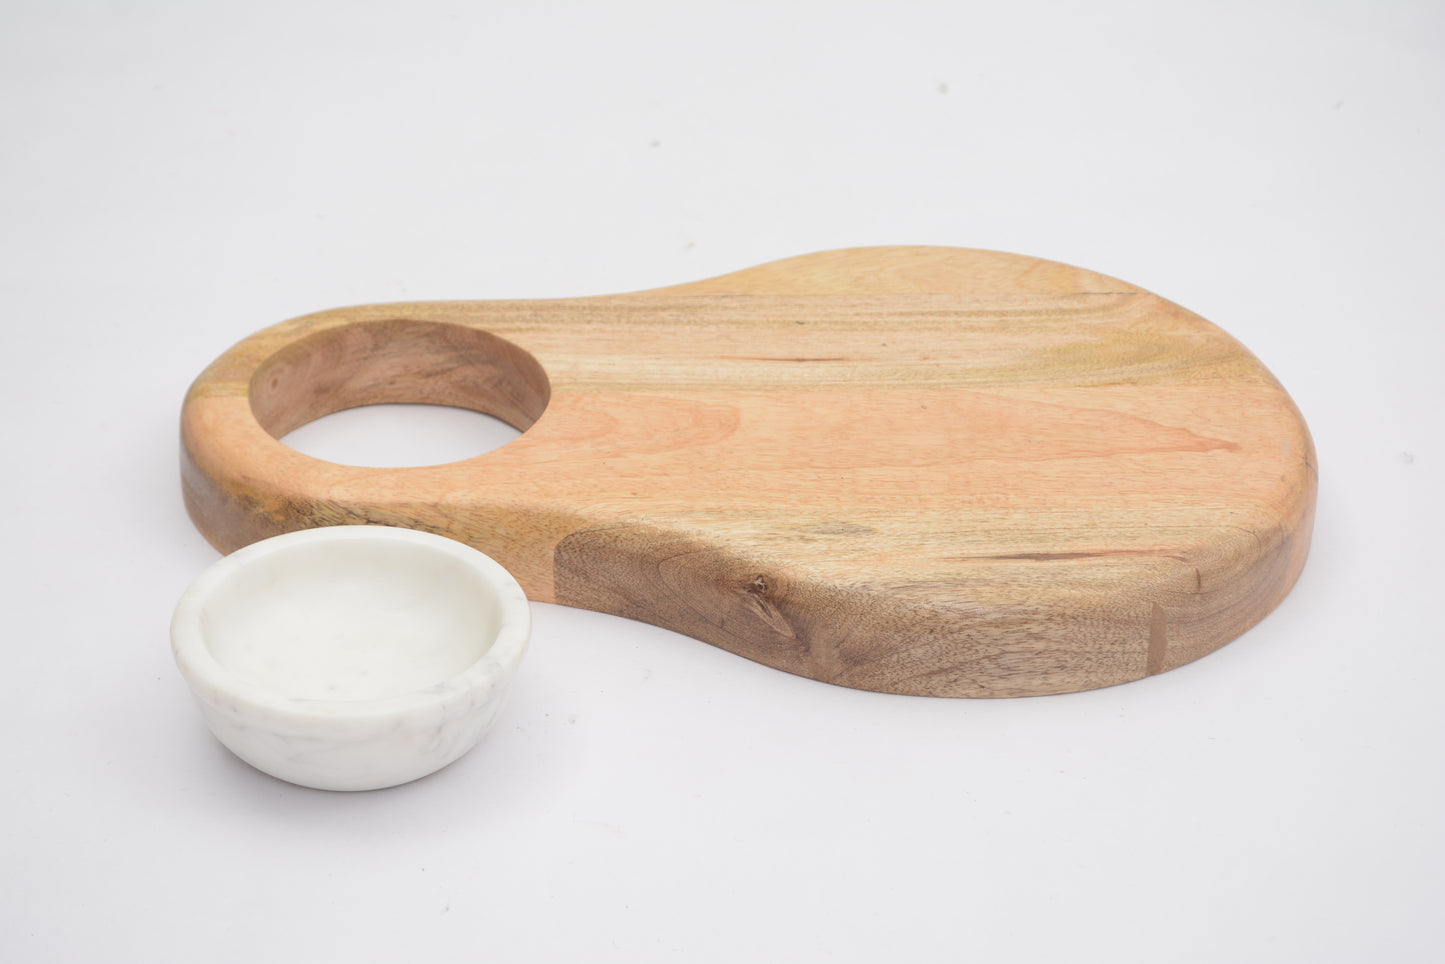 Mango Wood Serving Board with Marble Bowl